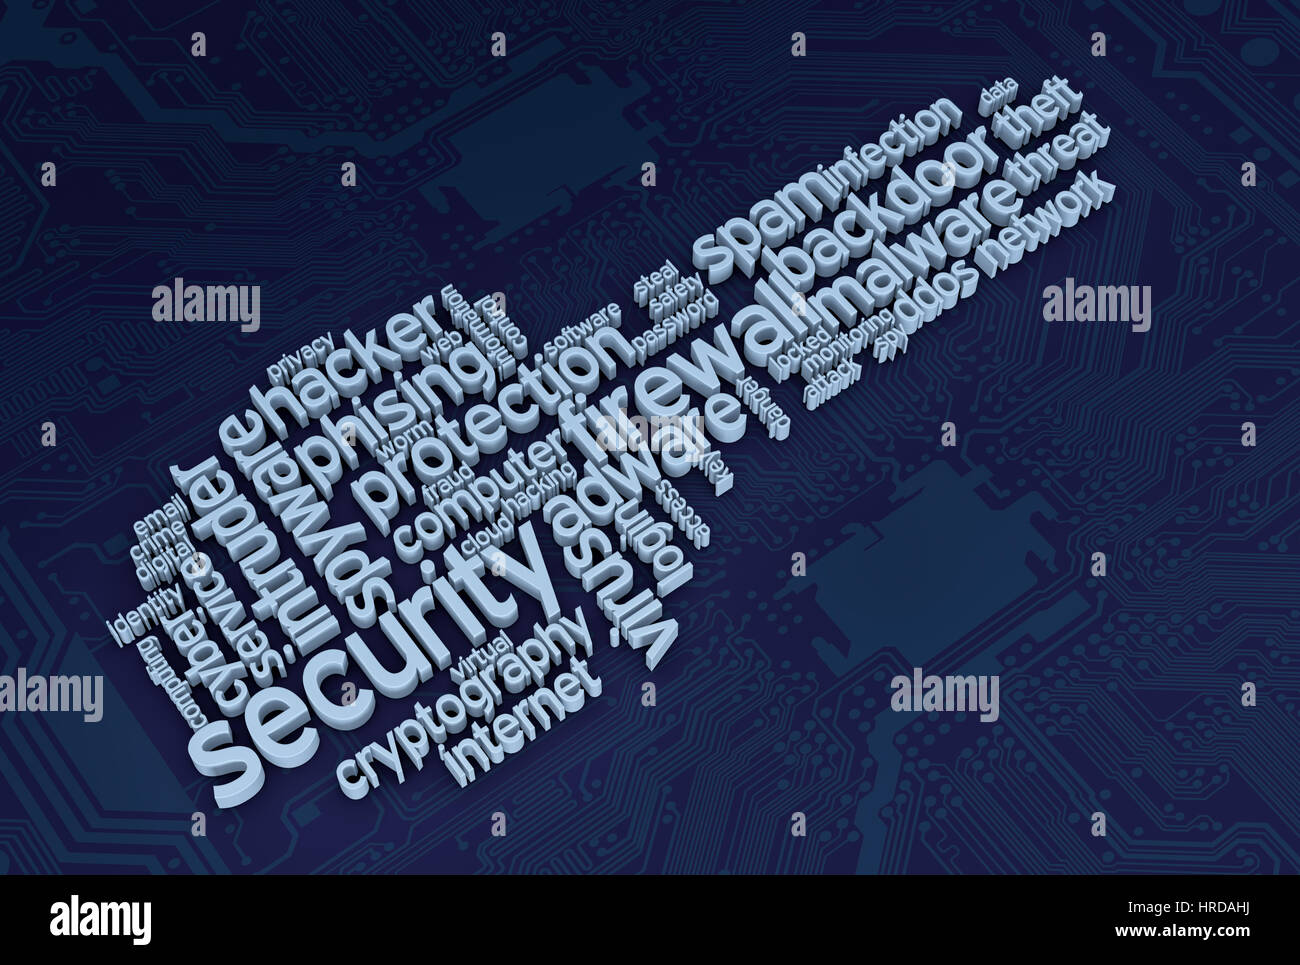 word cloud with terms about computer security (3d render) Stock Photo